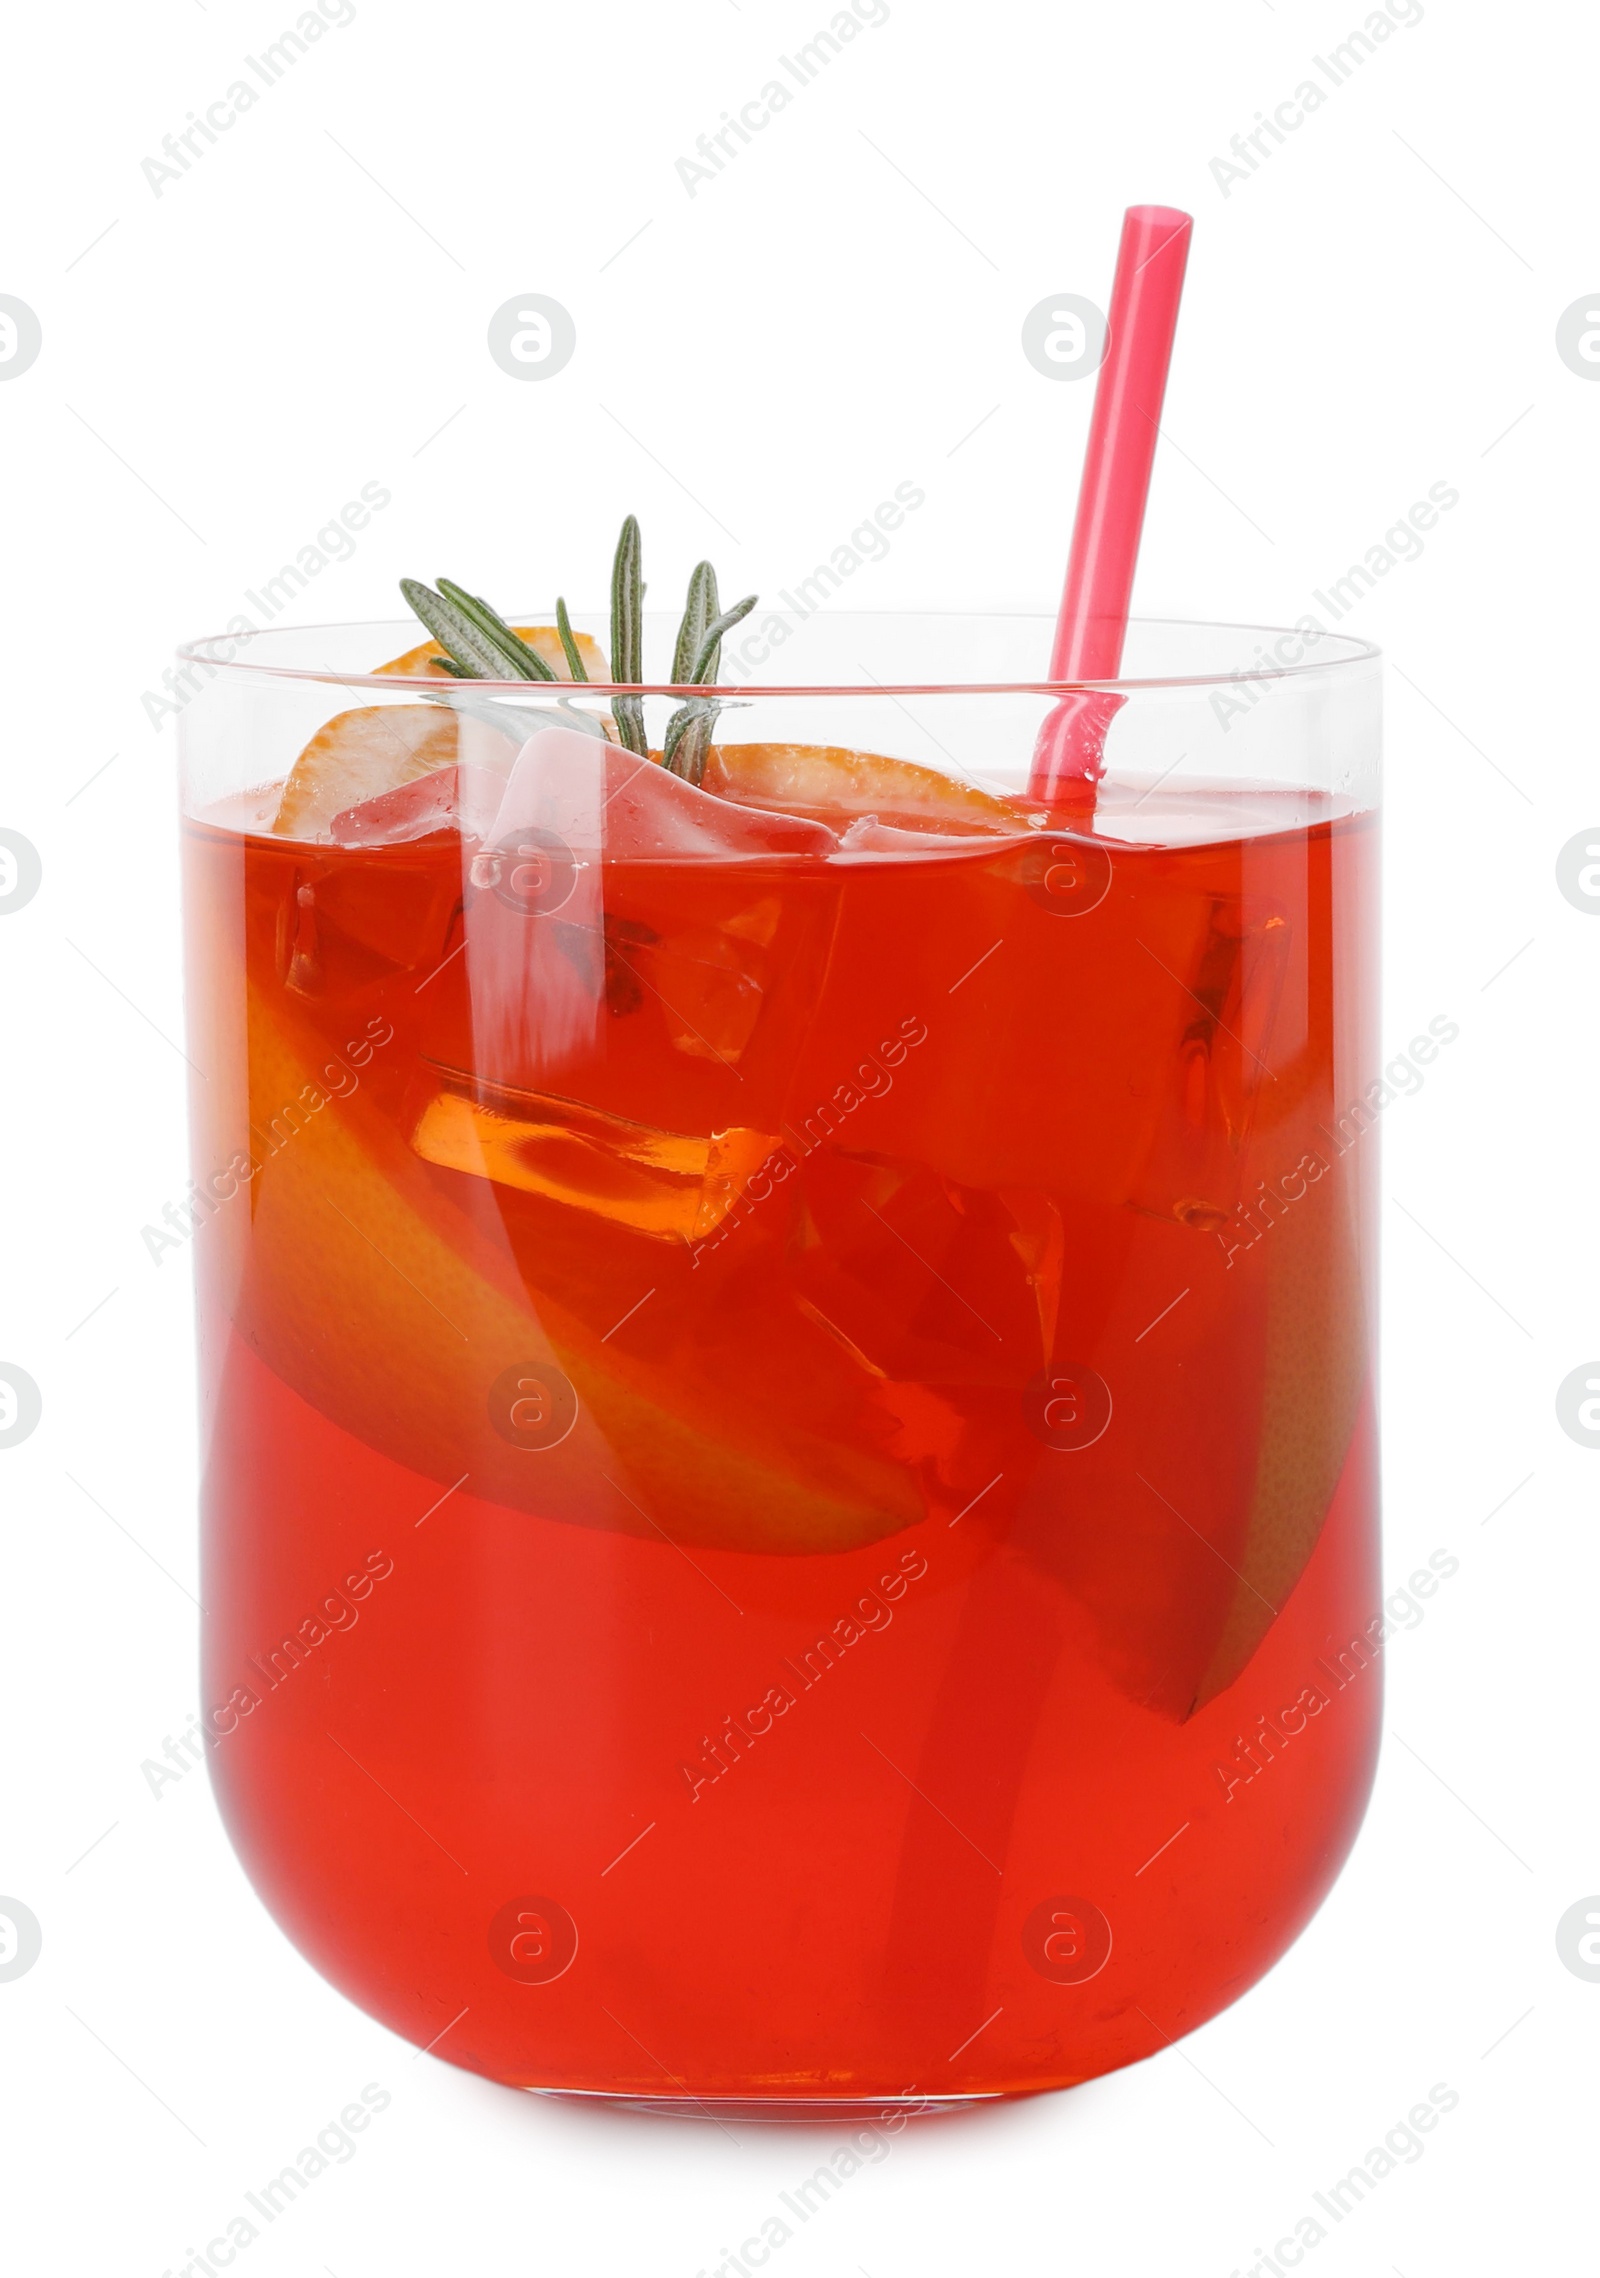 Photo of Aperol spritz cocktail, straw, orange slices and rosemary in glass isolated on white